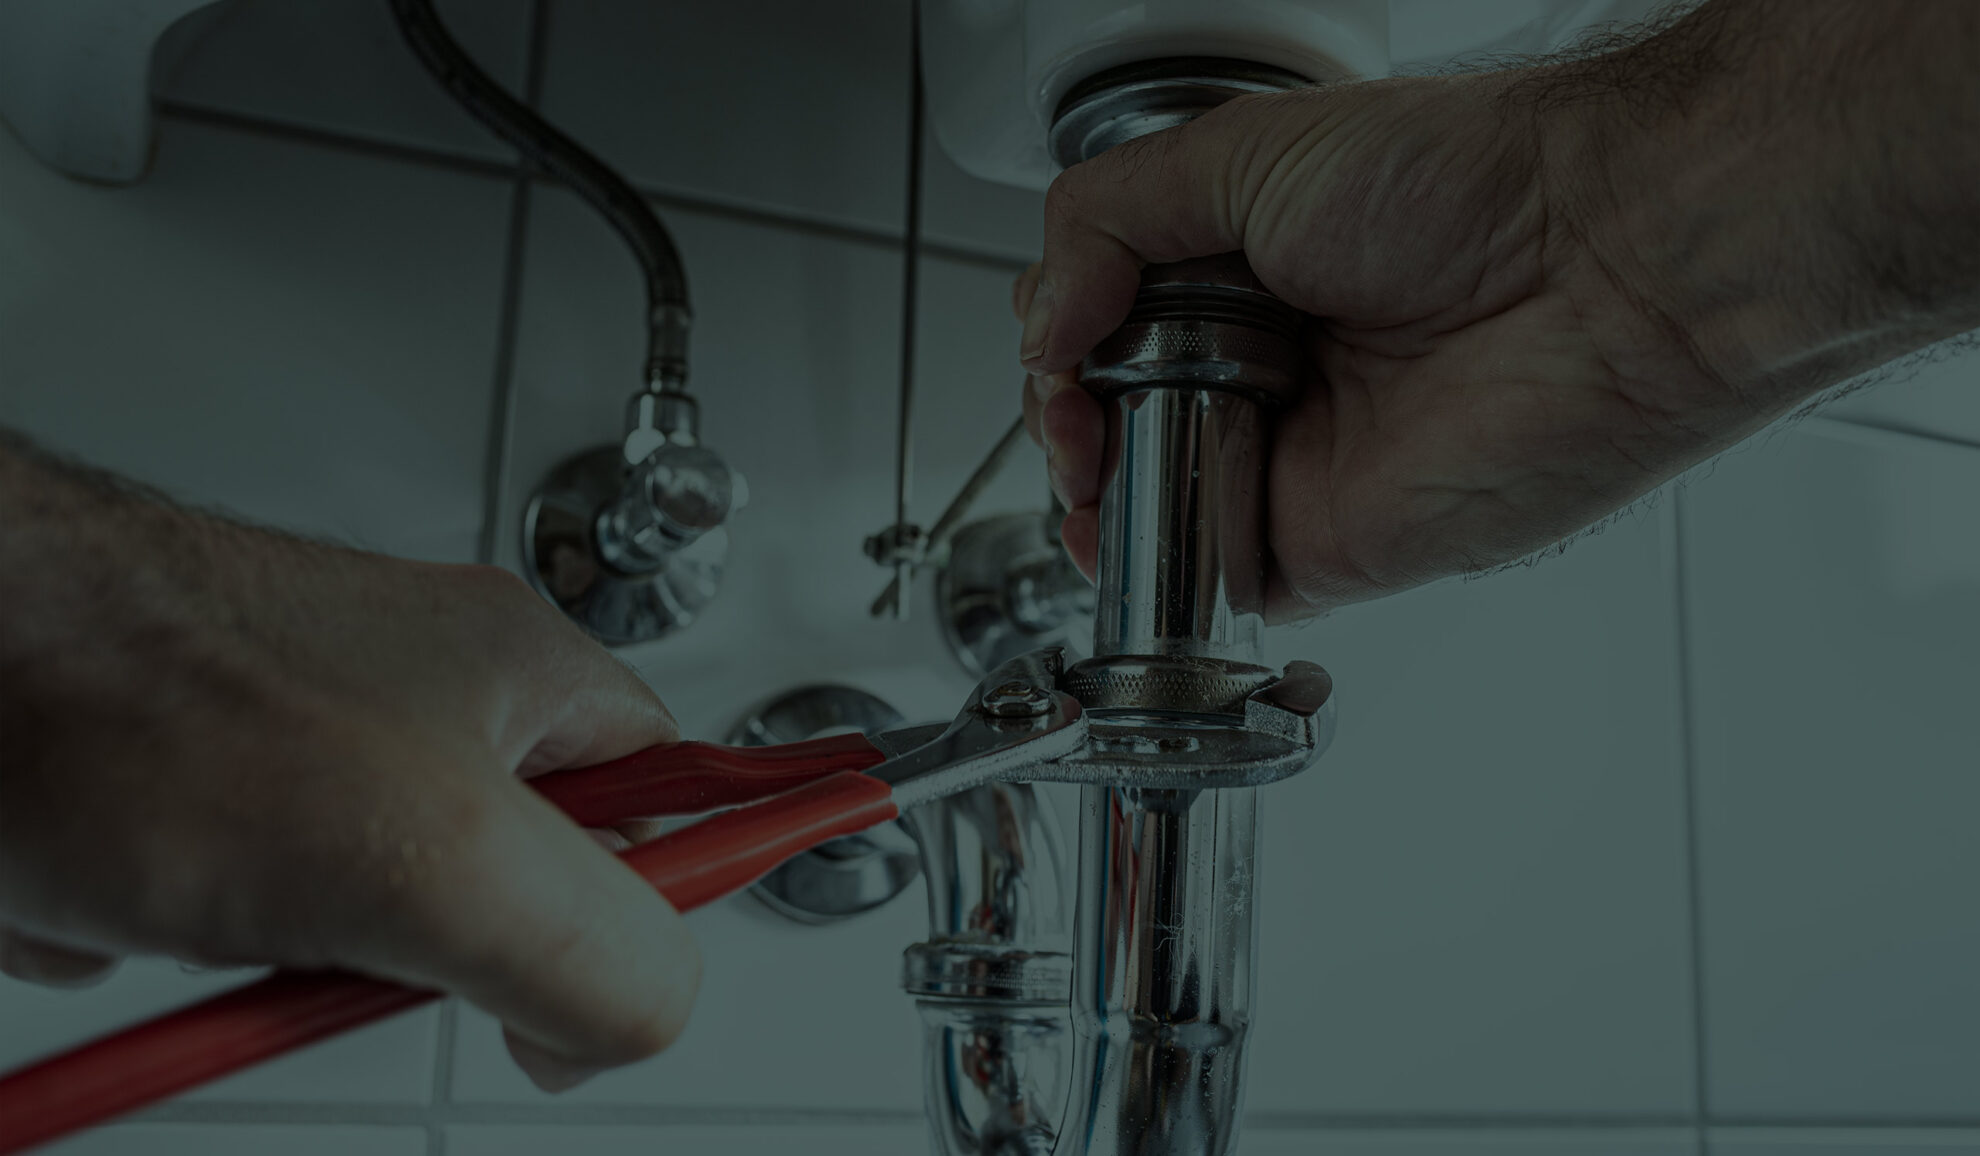 plumber hands close up repairing bathroom pipes with wrench elk river mn